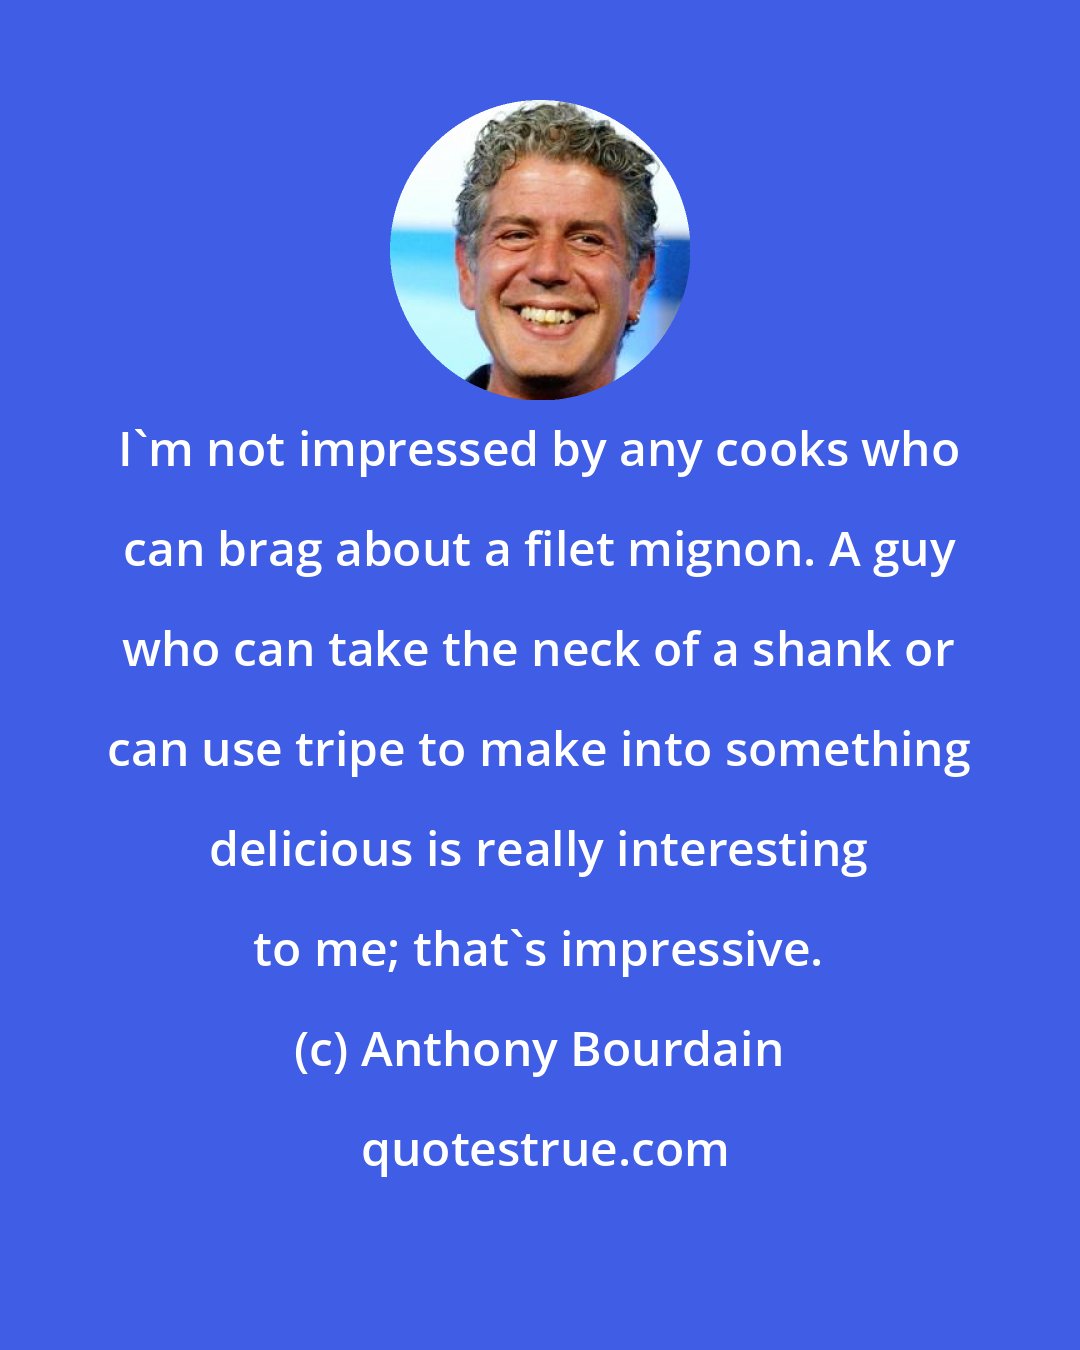 Anthony Bourdain: I'm not impressed by any cooks who can brag about a filet mignon. A guy who can take the neck of a shank or can use tripe to make into something delicious is really interesting to me; that's impressive.